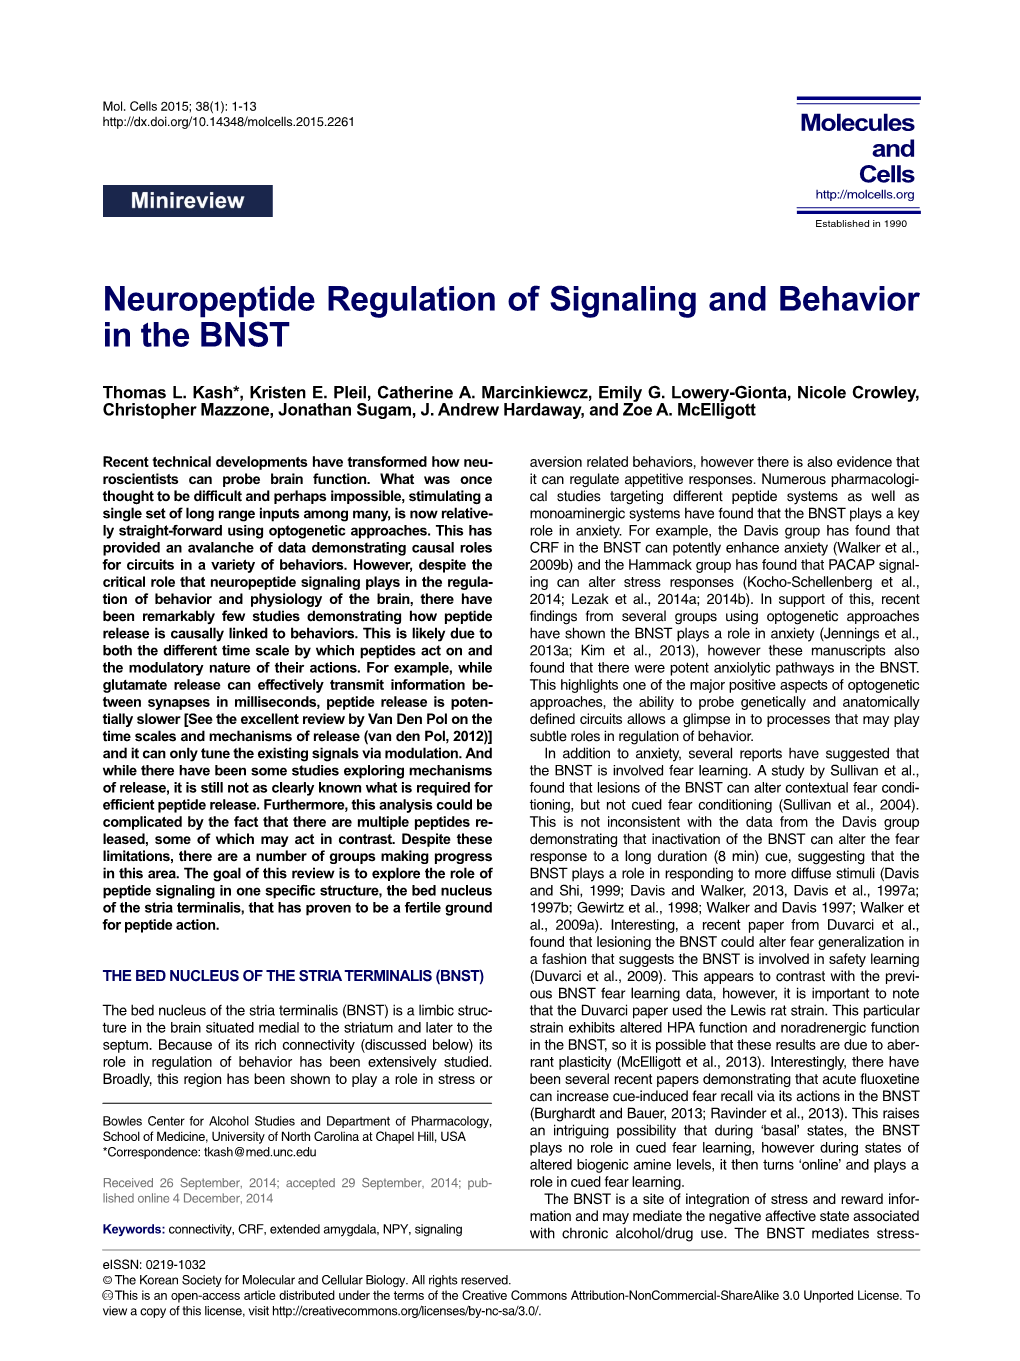 Neuropeptide Regulation of Signaling and Behavior in the BNST